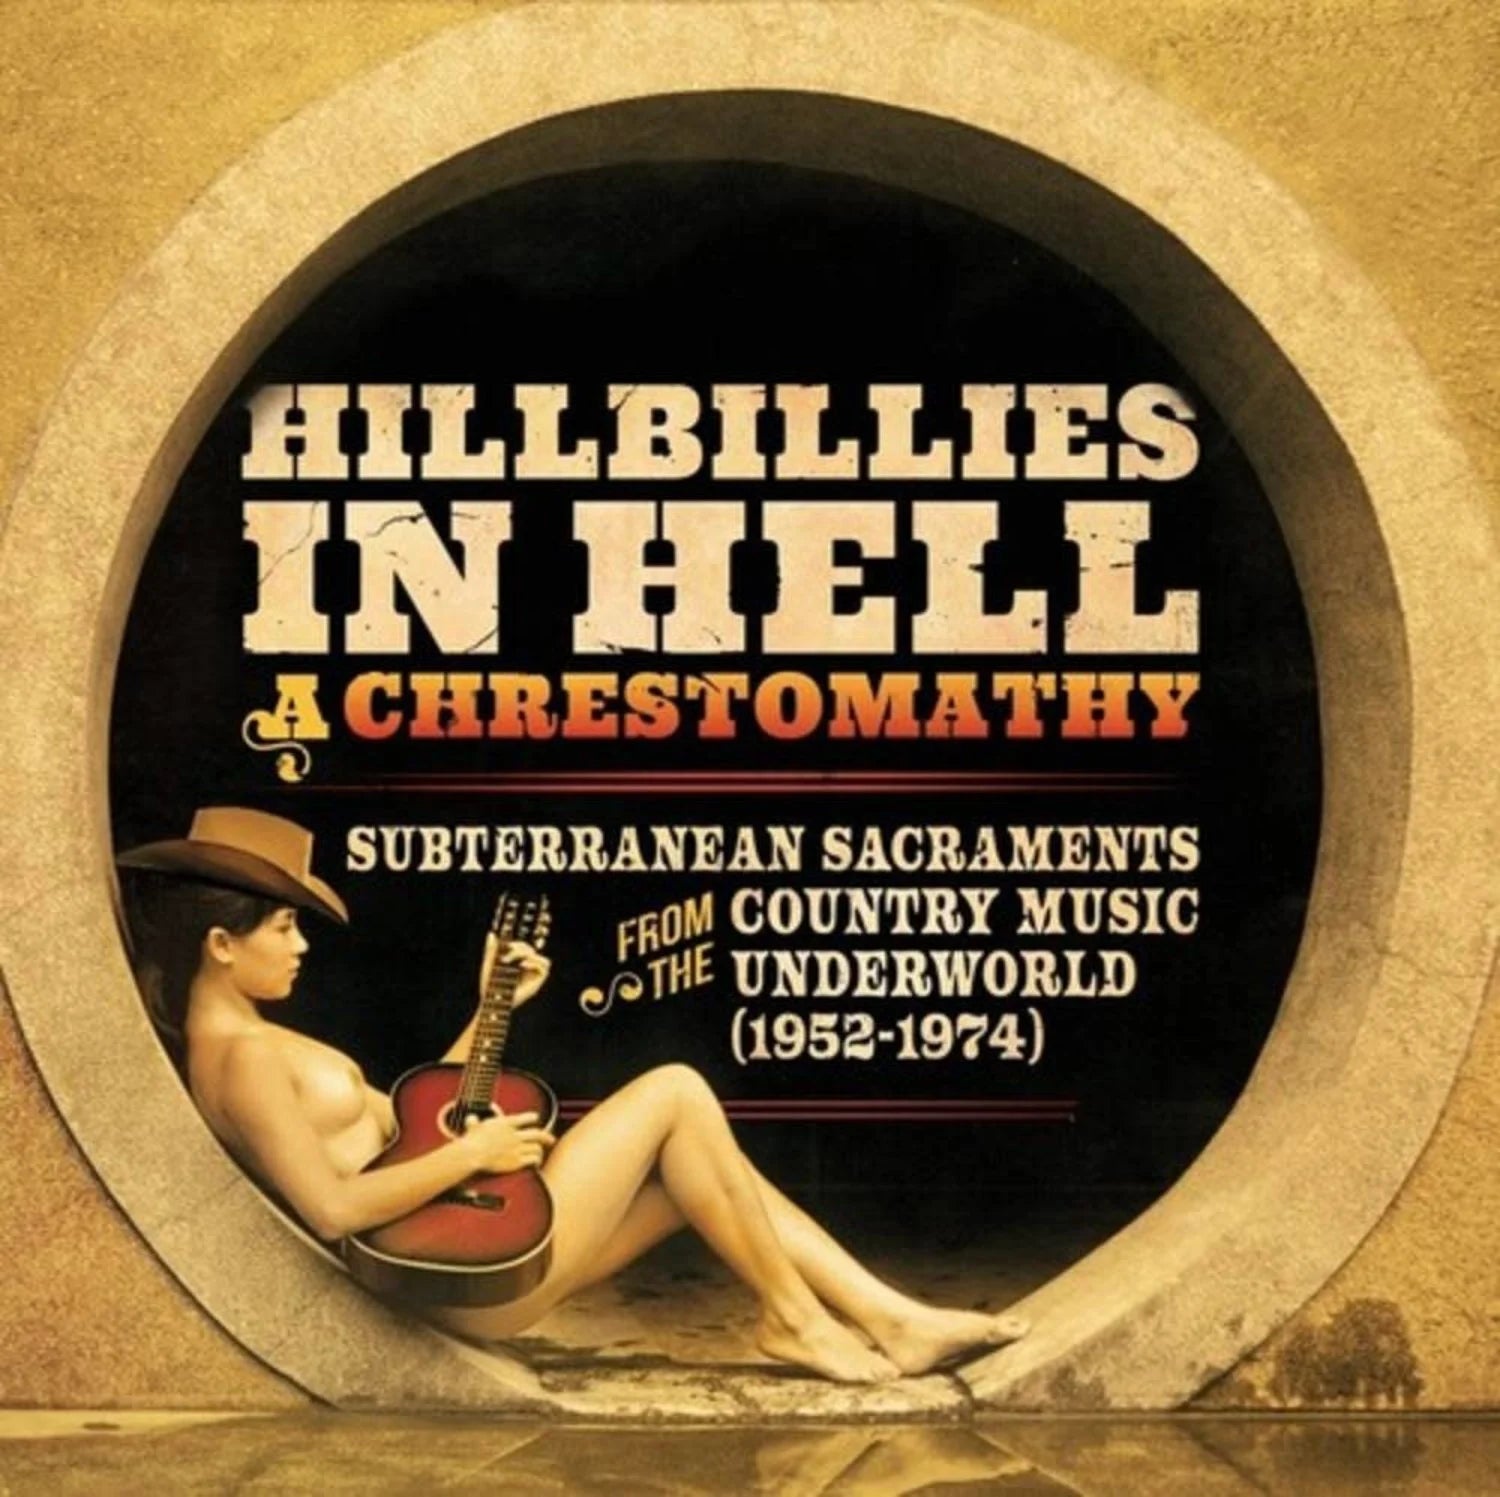 Hillbillies in Hell - Subterranean Sacraments From the Country Music Underworld